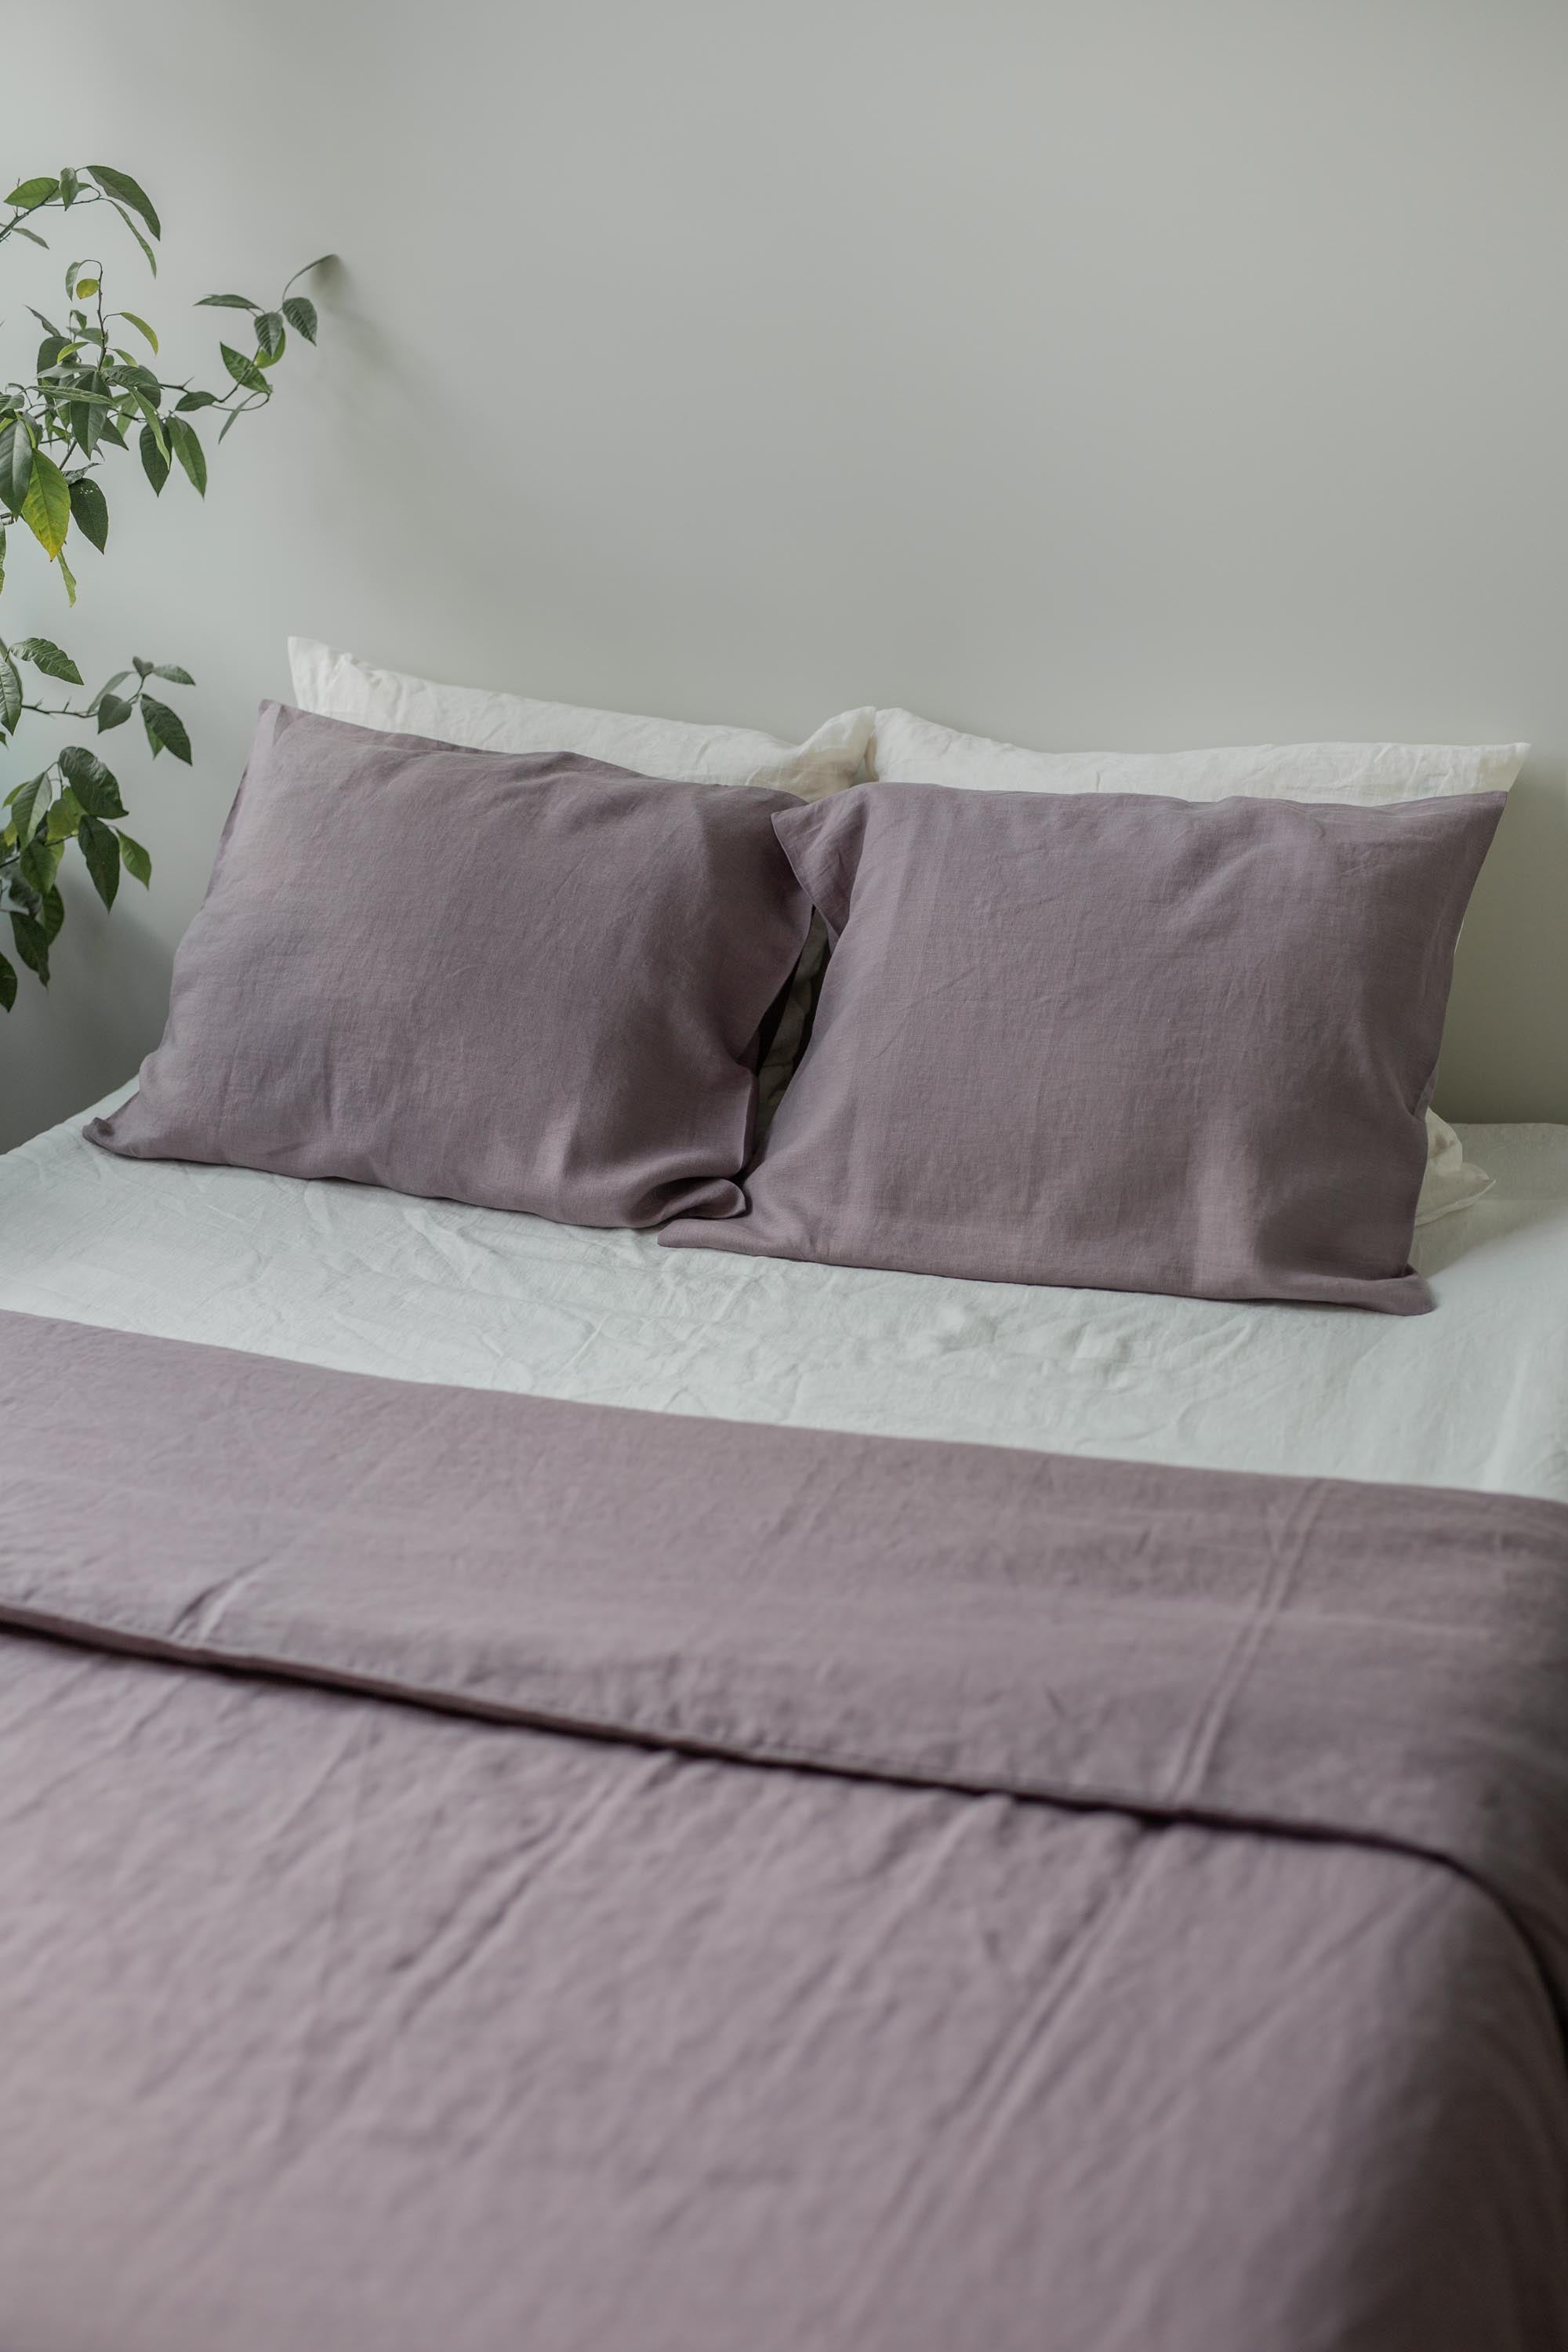 Tidy Bed With Dusty Lavender Linen Duvet Cover By AmourlInen